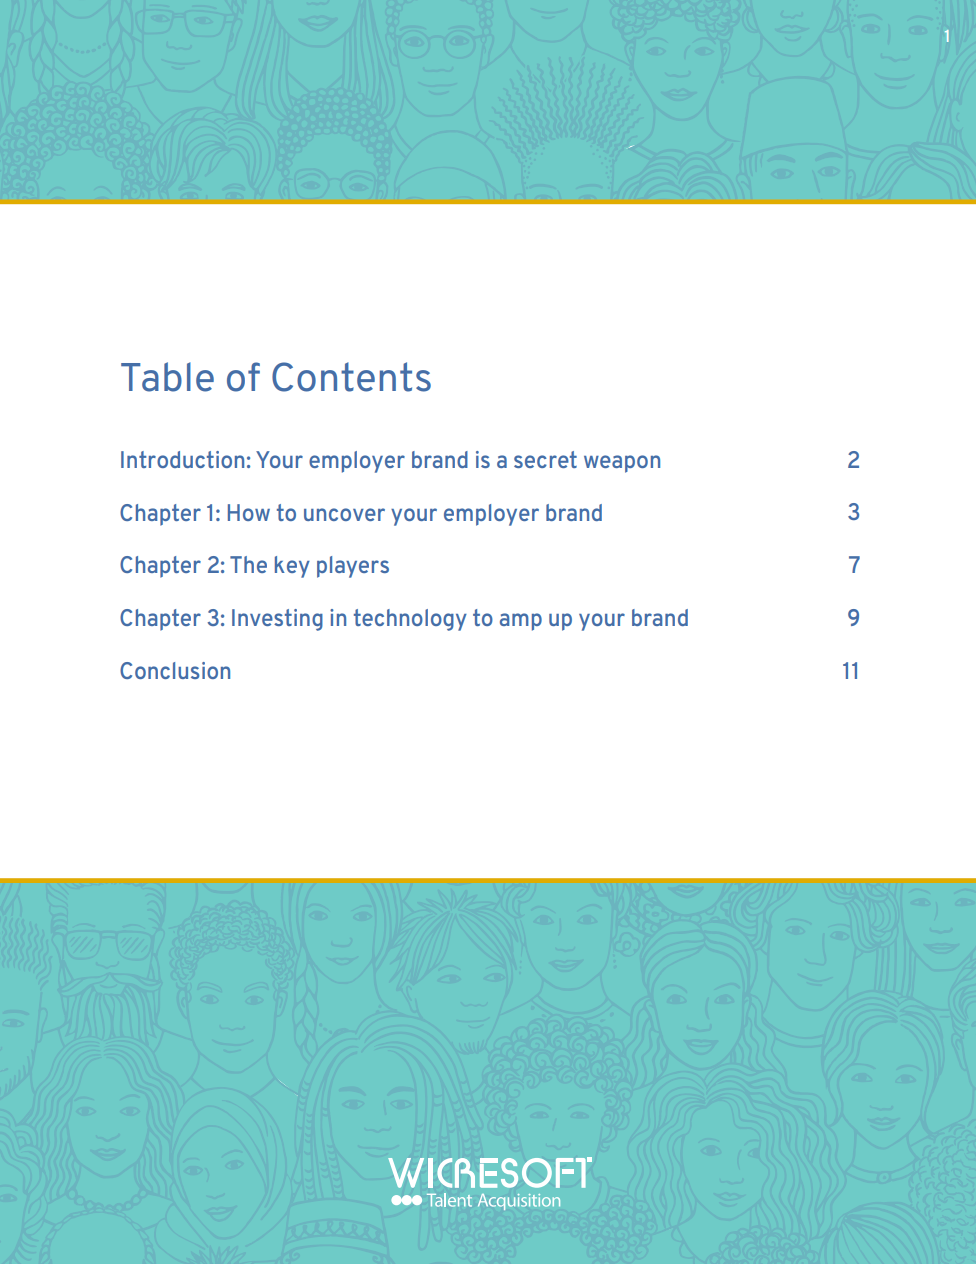 Wicresoft Employer Brand Guide Table of Contents